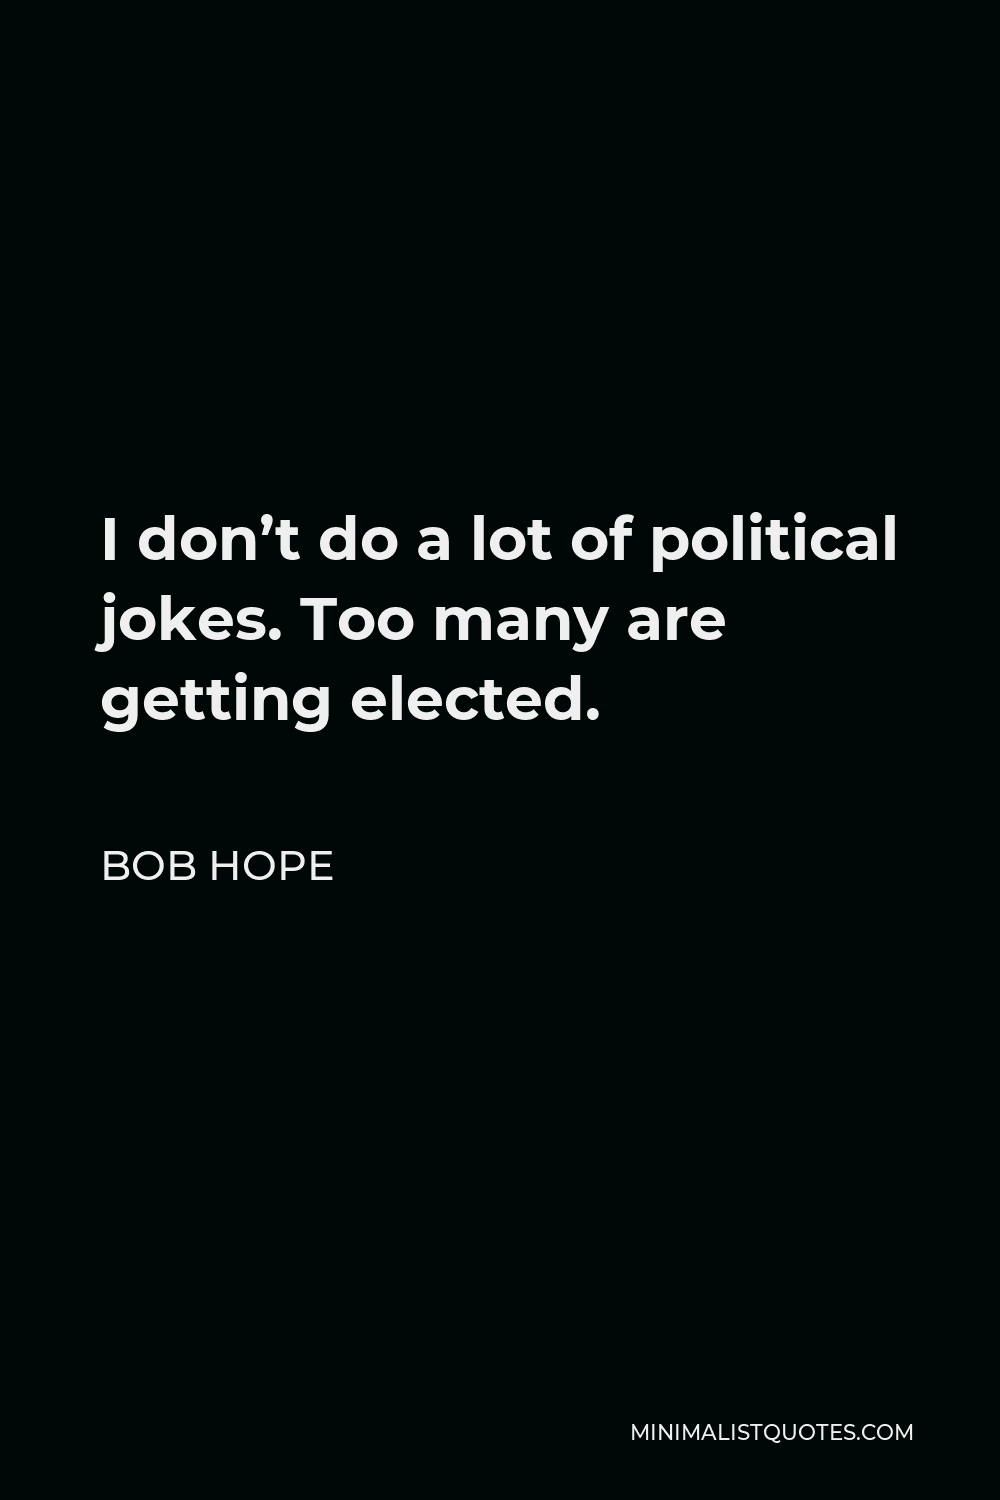 Bob Hope Quote - I don’t do a lot of political jokes. Too many are getting elected.